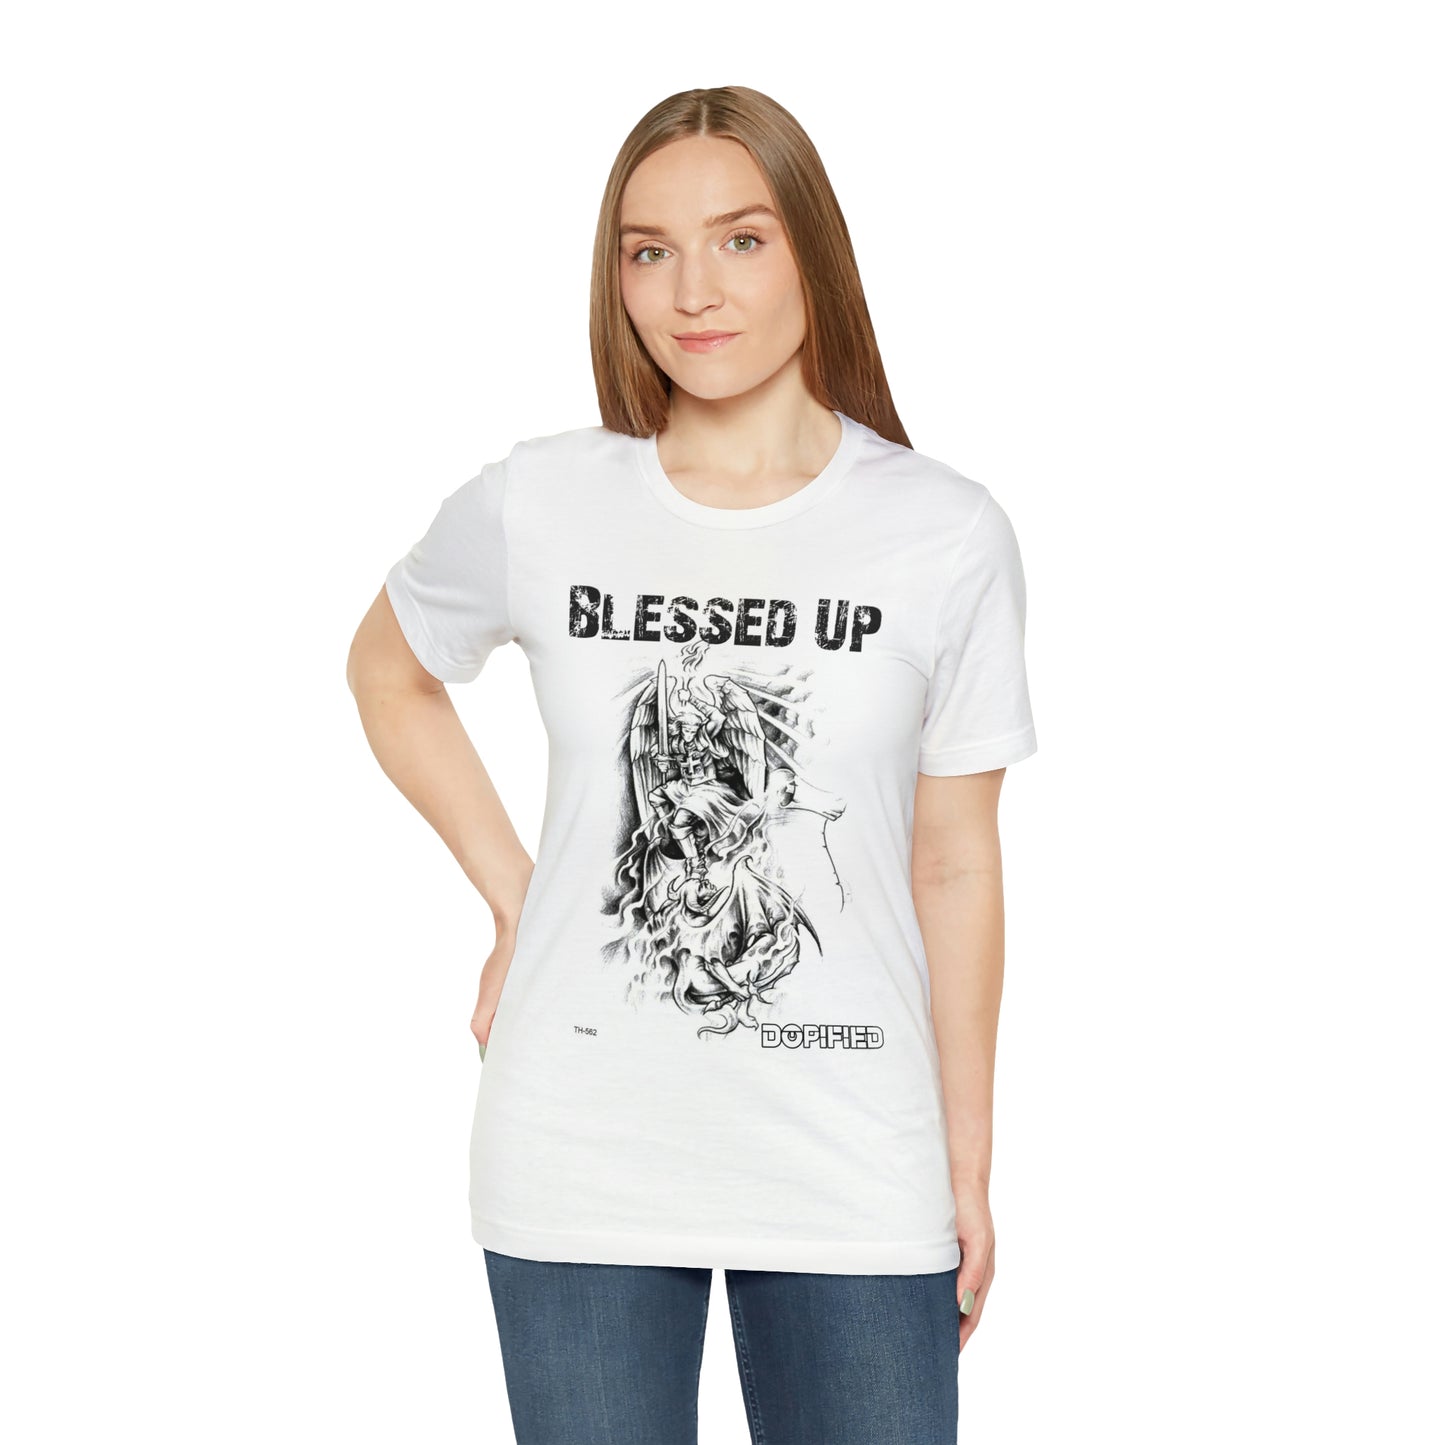 "Blessed Up" Unisex Jersey Short Sleeve Tee